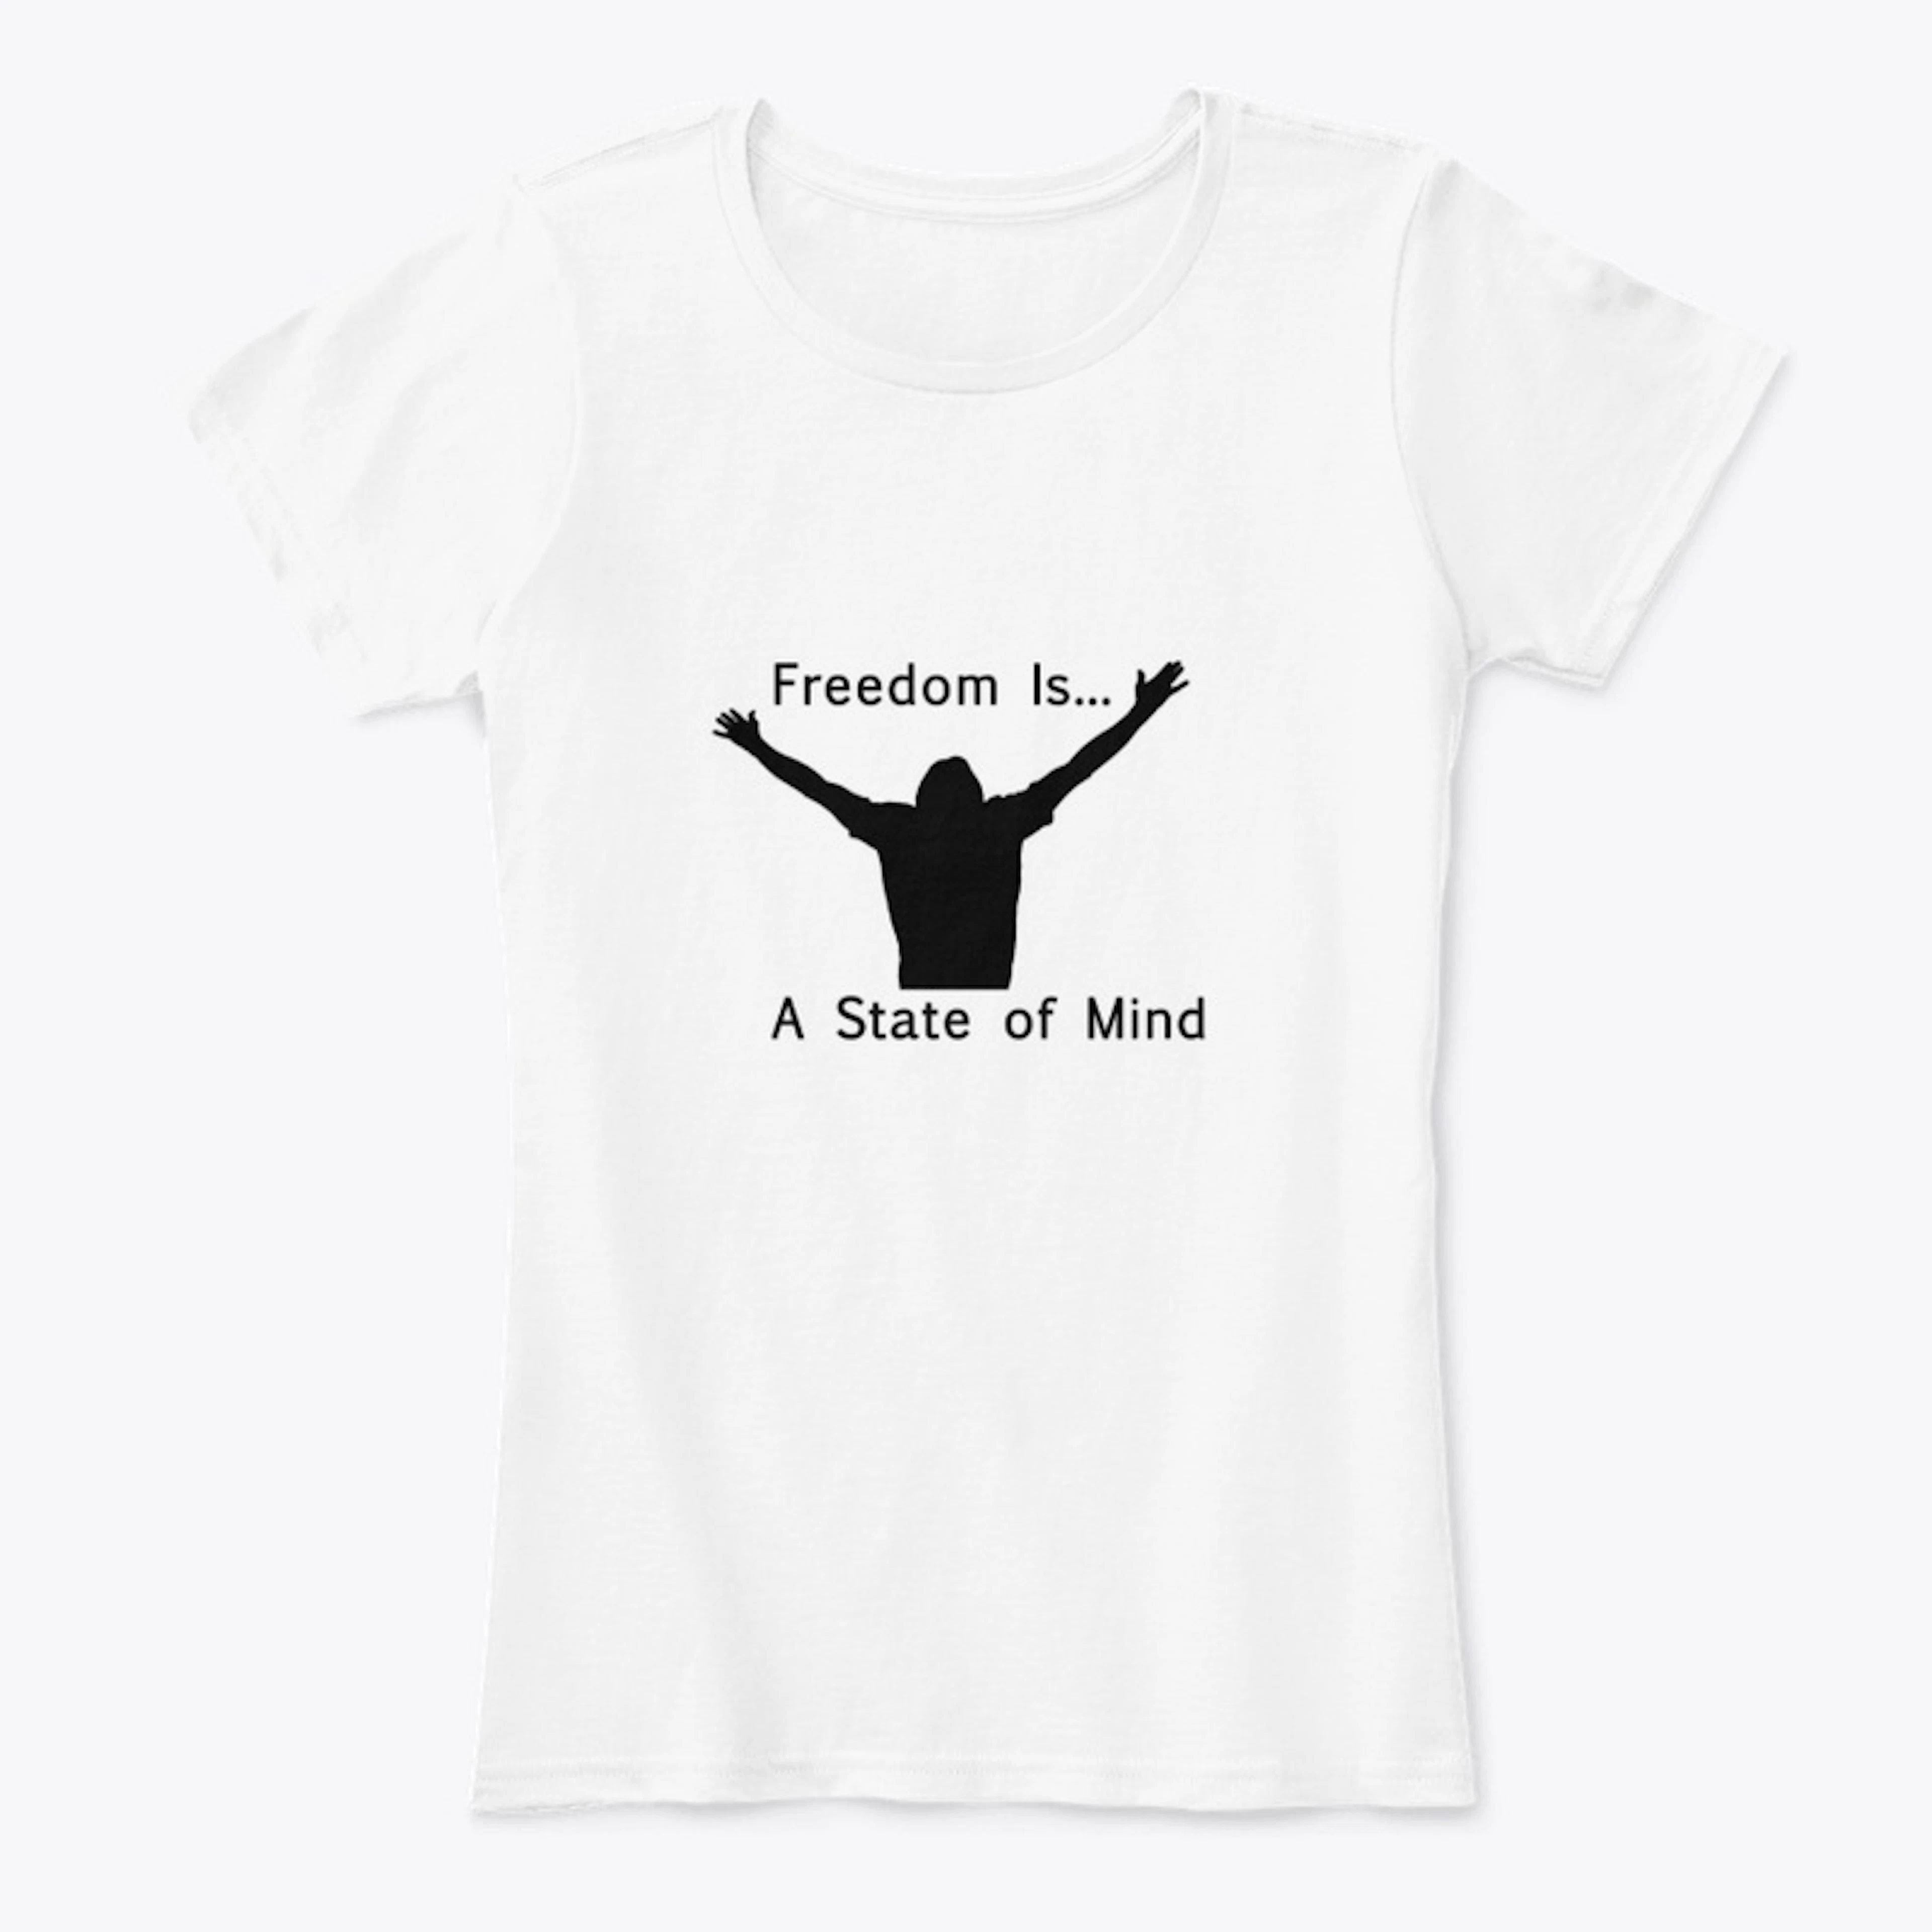 Freedom Is... A State of Mind